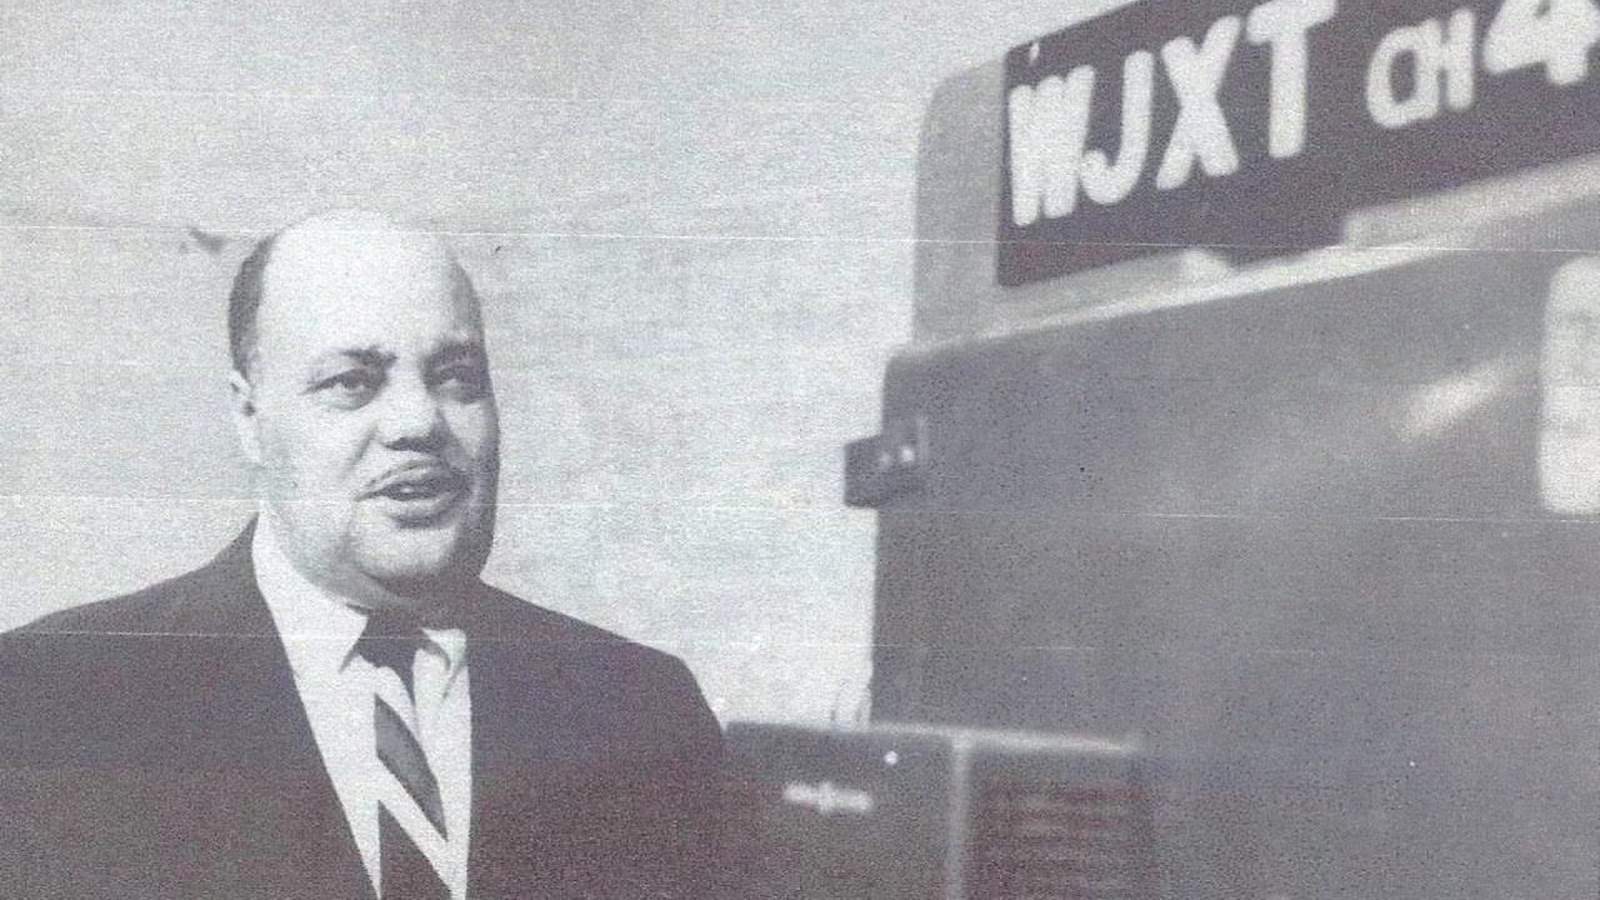 Ken Knight helped pave the way for African Americans to get into broadcast industry